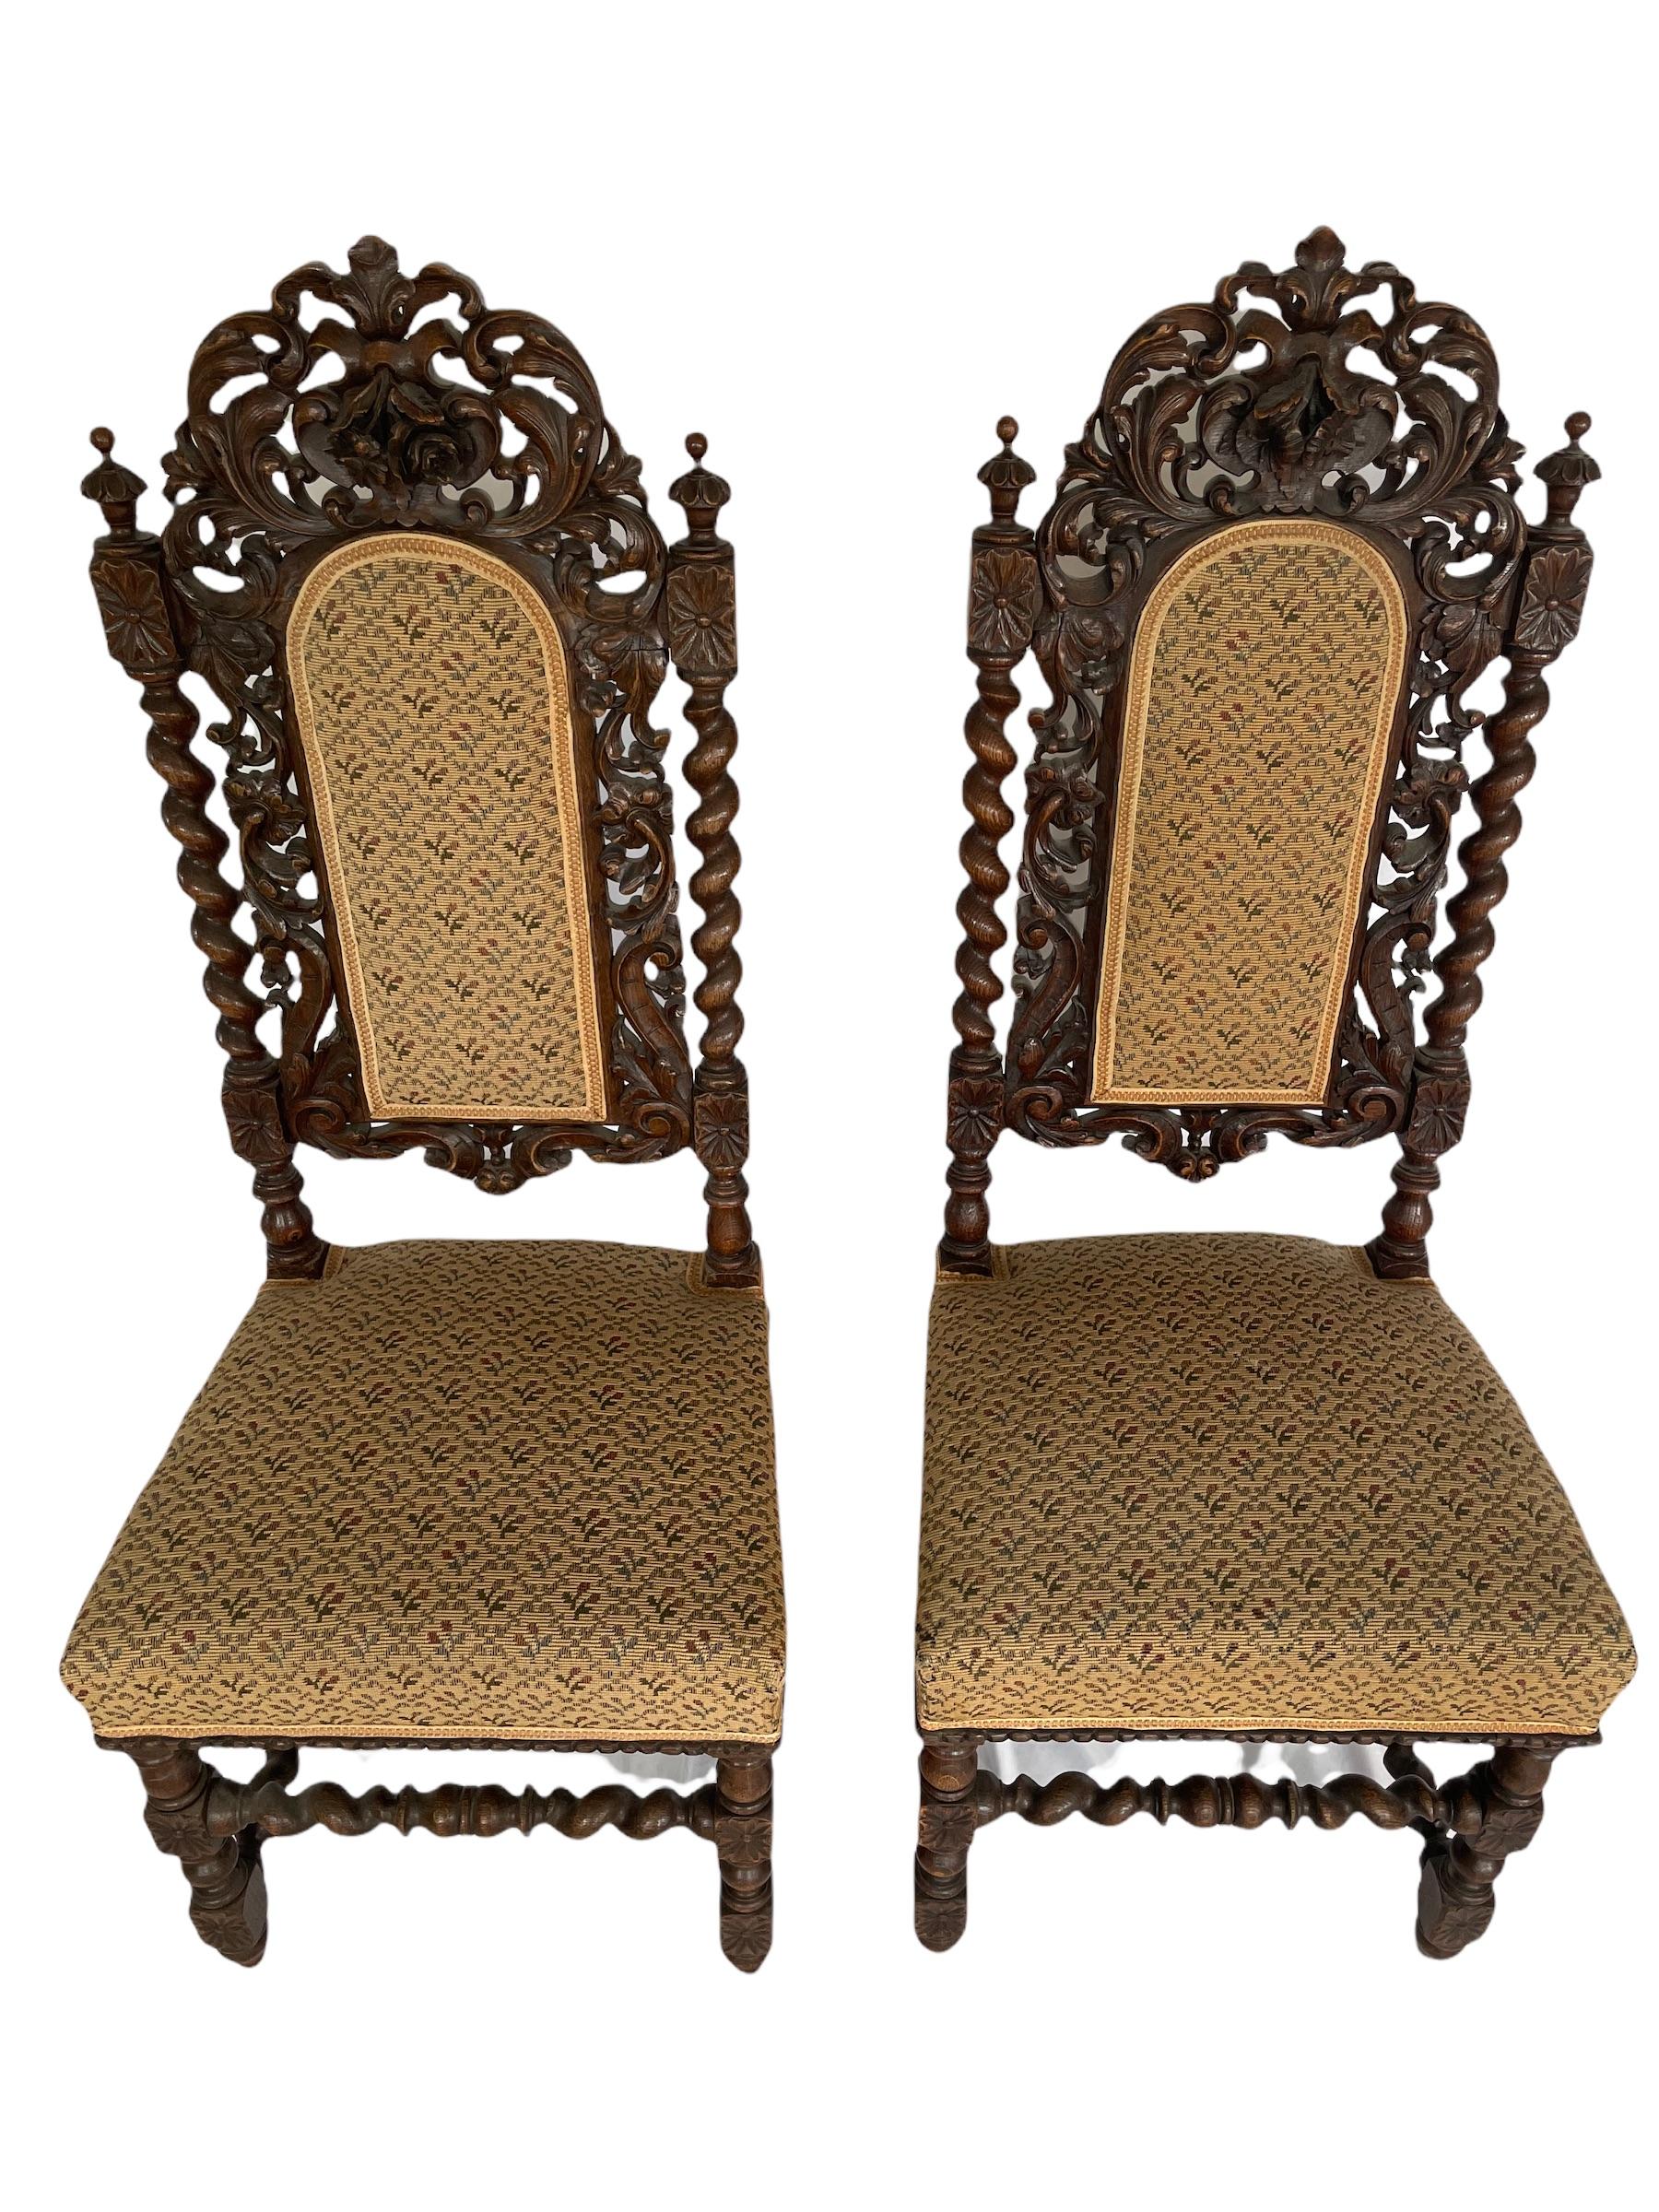 Renaissance Revival 19th Century French Neo Renaissance Chairs For Sale